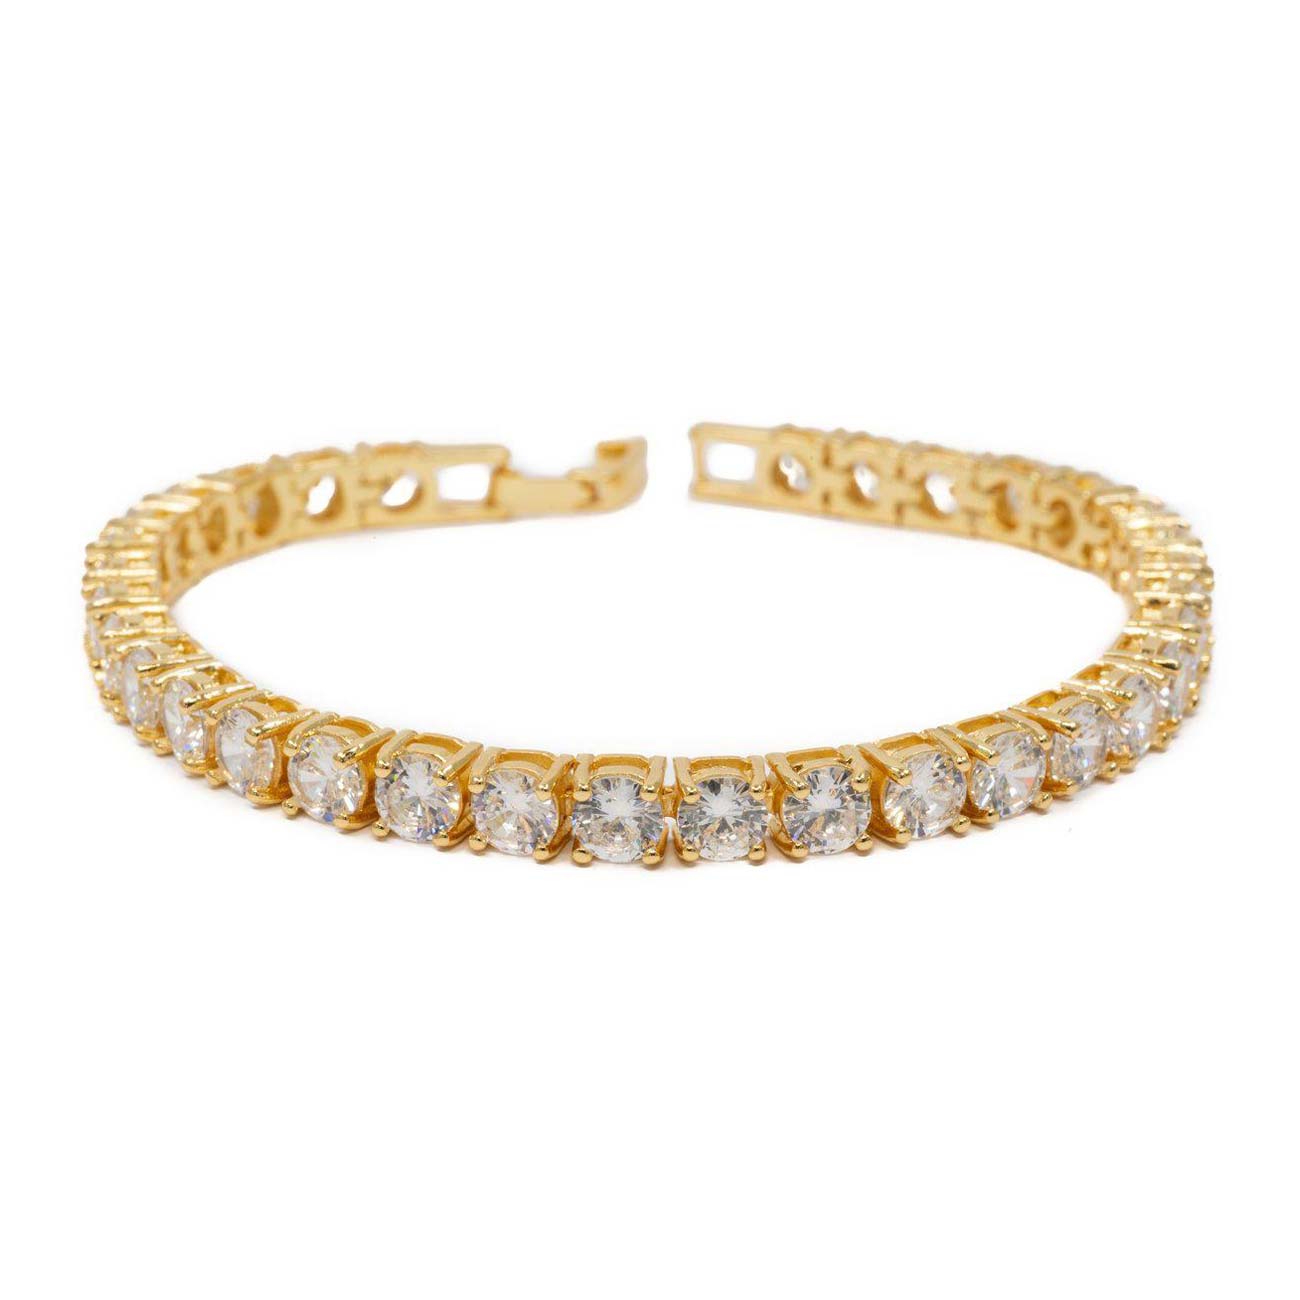 1.0 Carat Real Diamond Bracelet in Two Tone Yellow Gold Plated Sterling  Silver | eBay